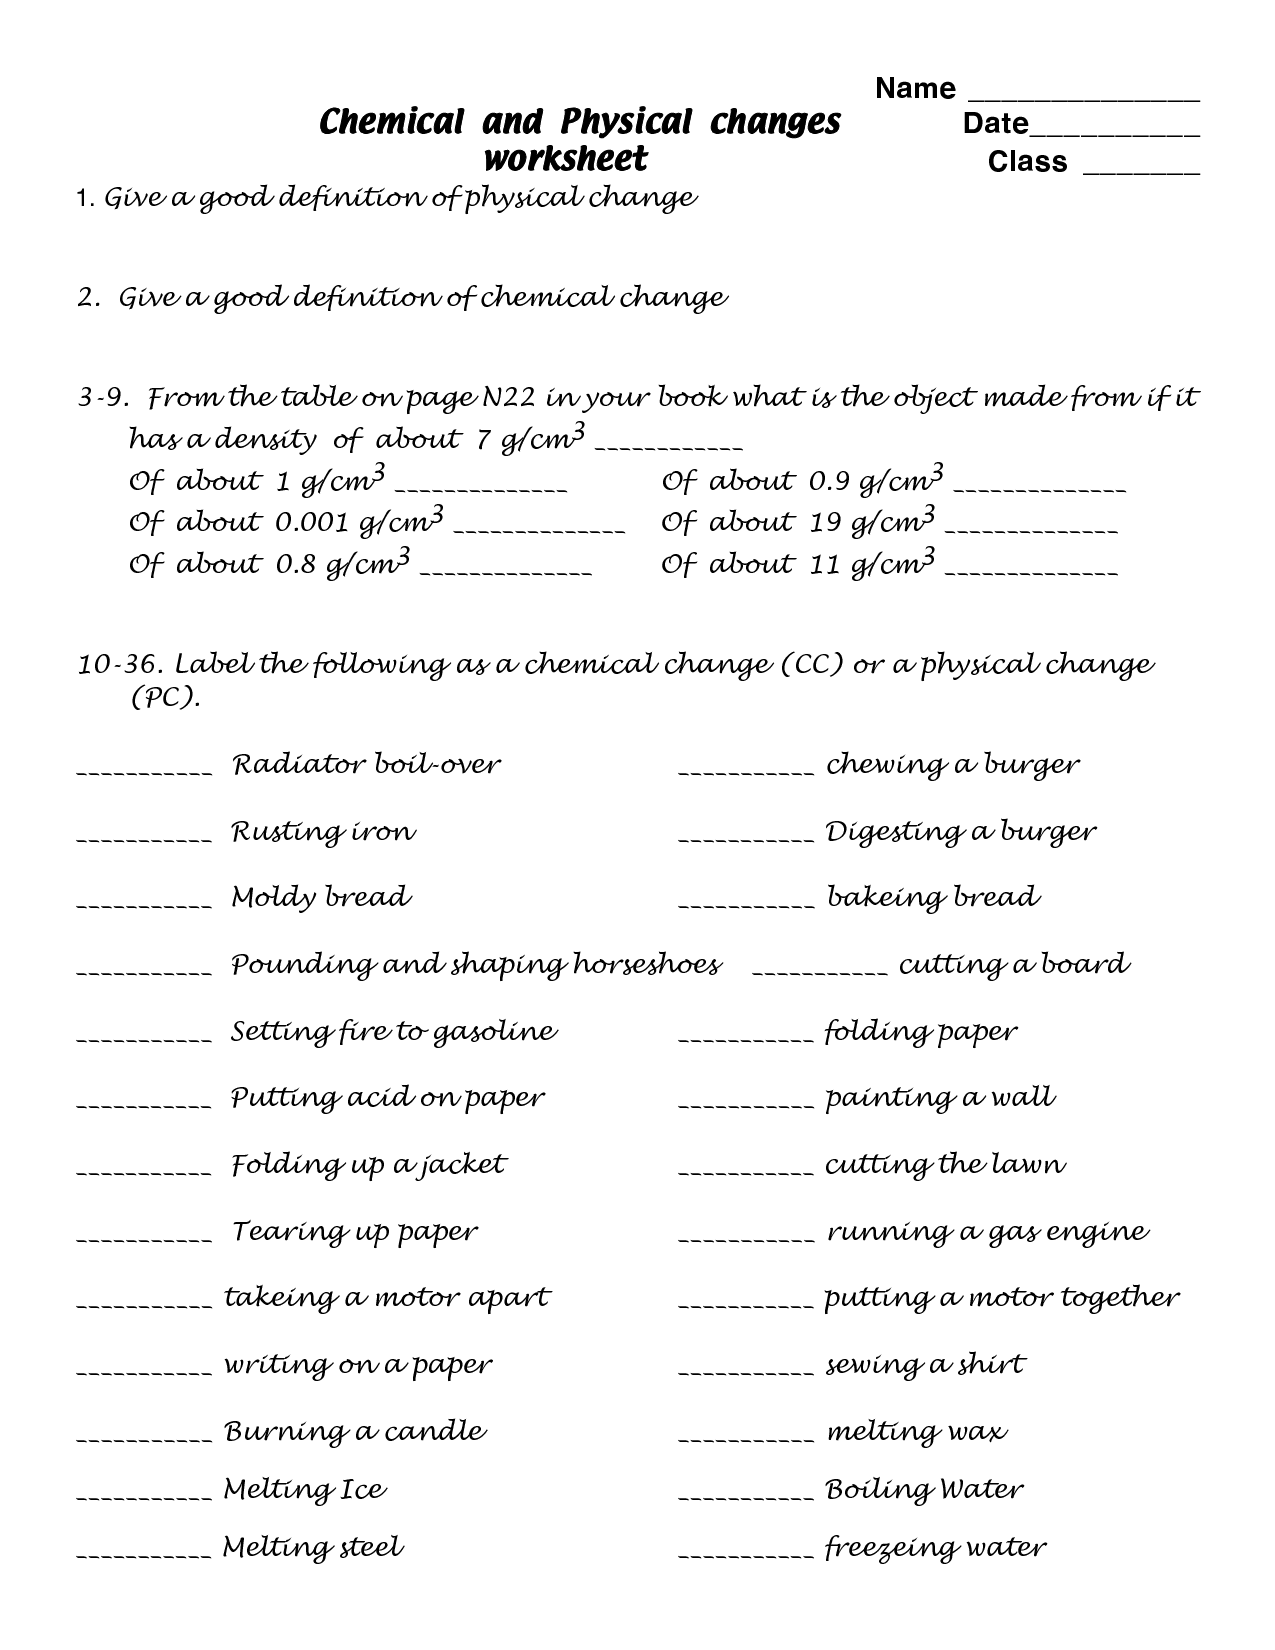 Physical Properties and Chemical Changes Worksheet